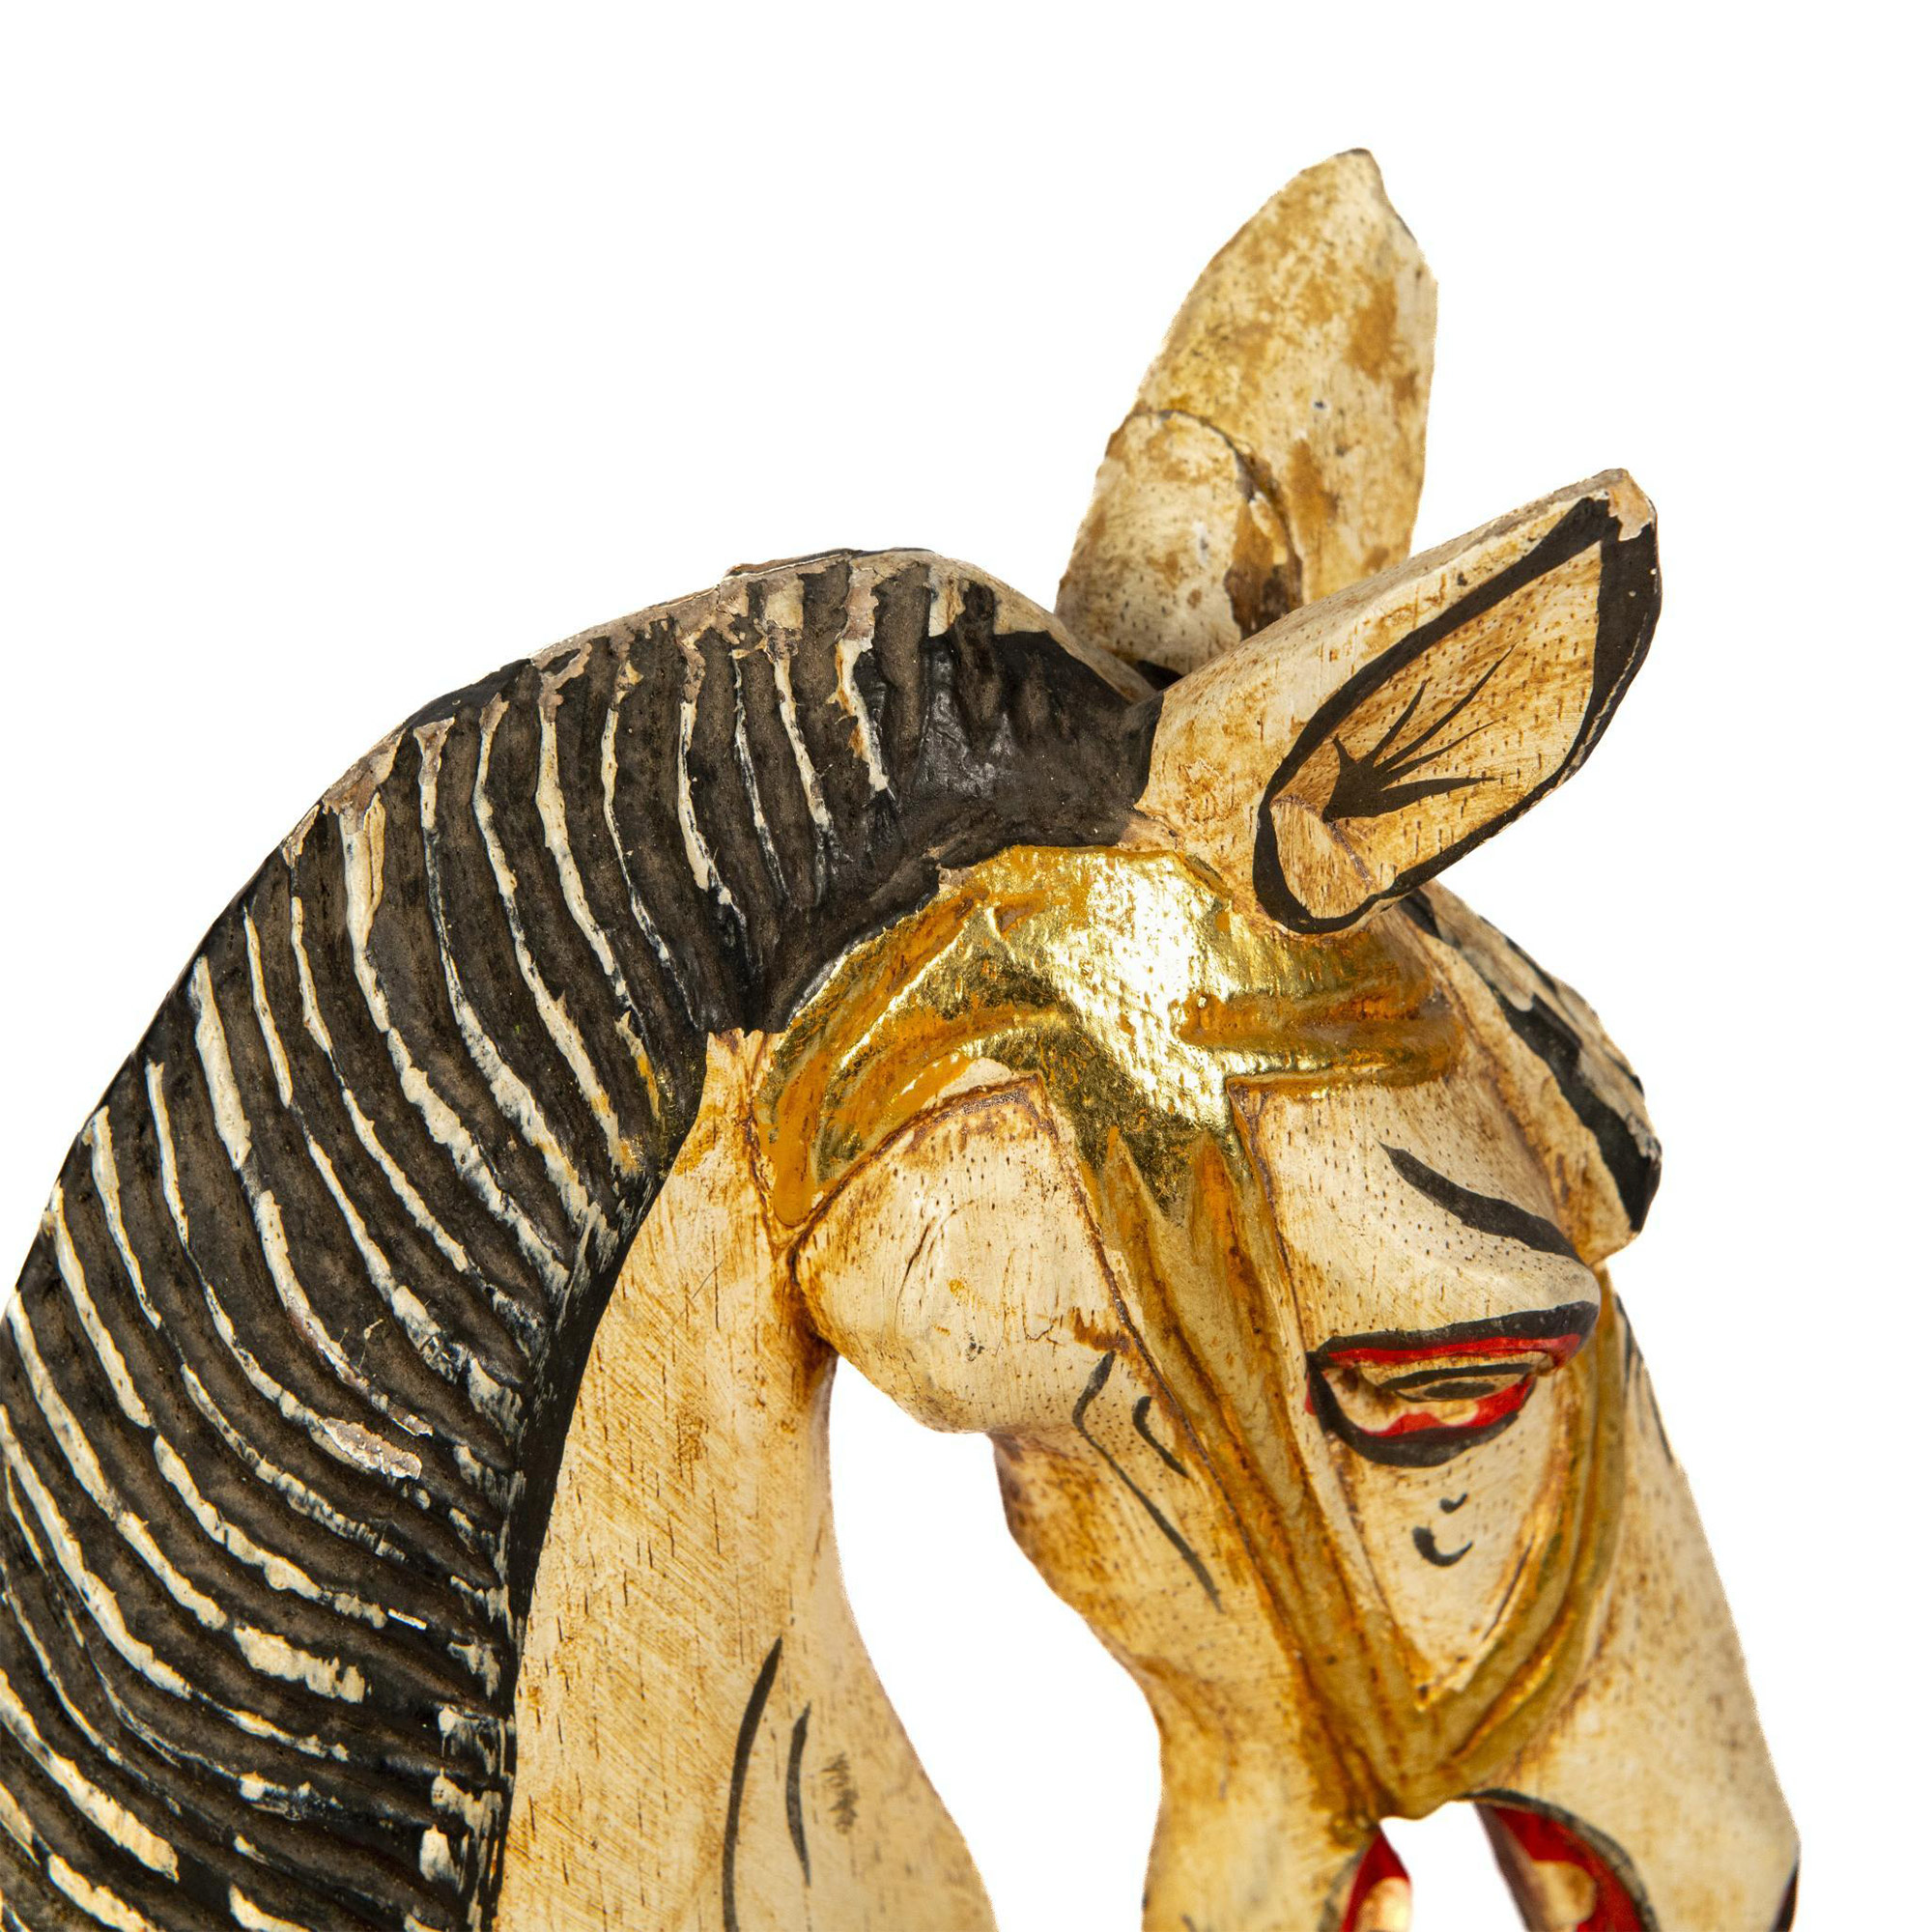 Small Decorative Wooden Carousel Rocking Horse - Image 5 of 6